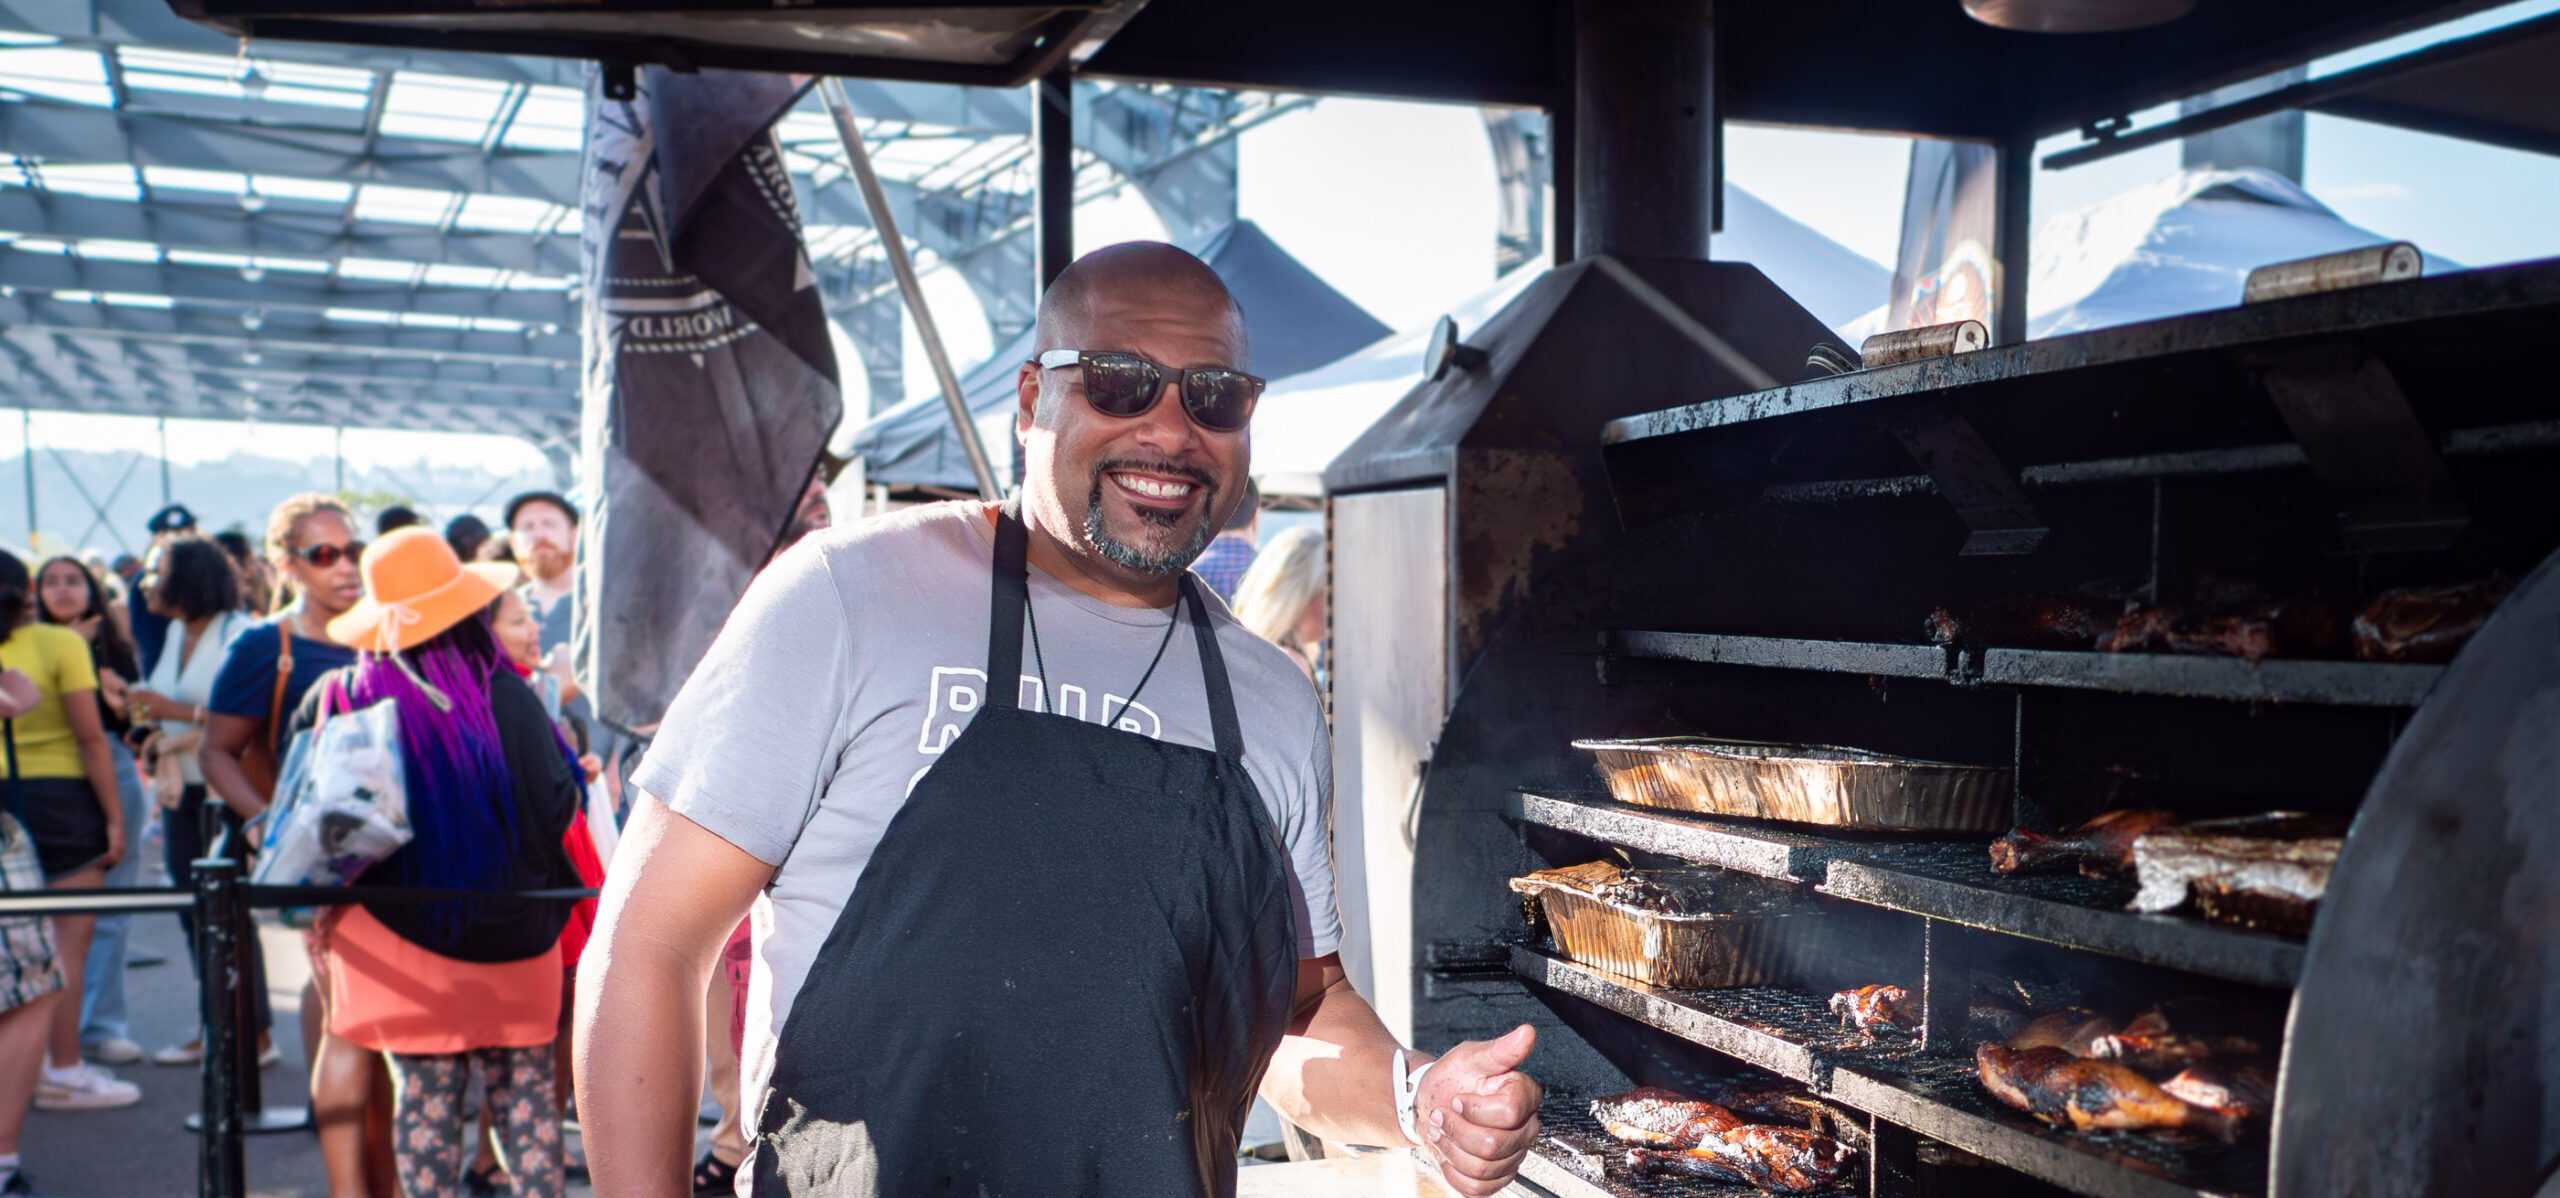 A cook smiling and posing next to a grill at the Blues BBQ Festival